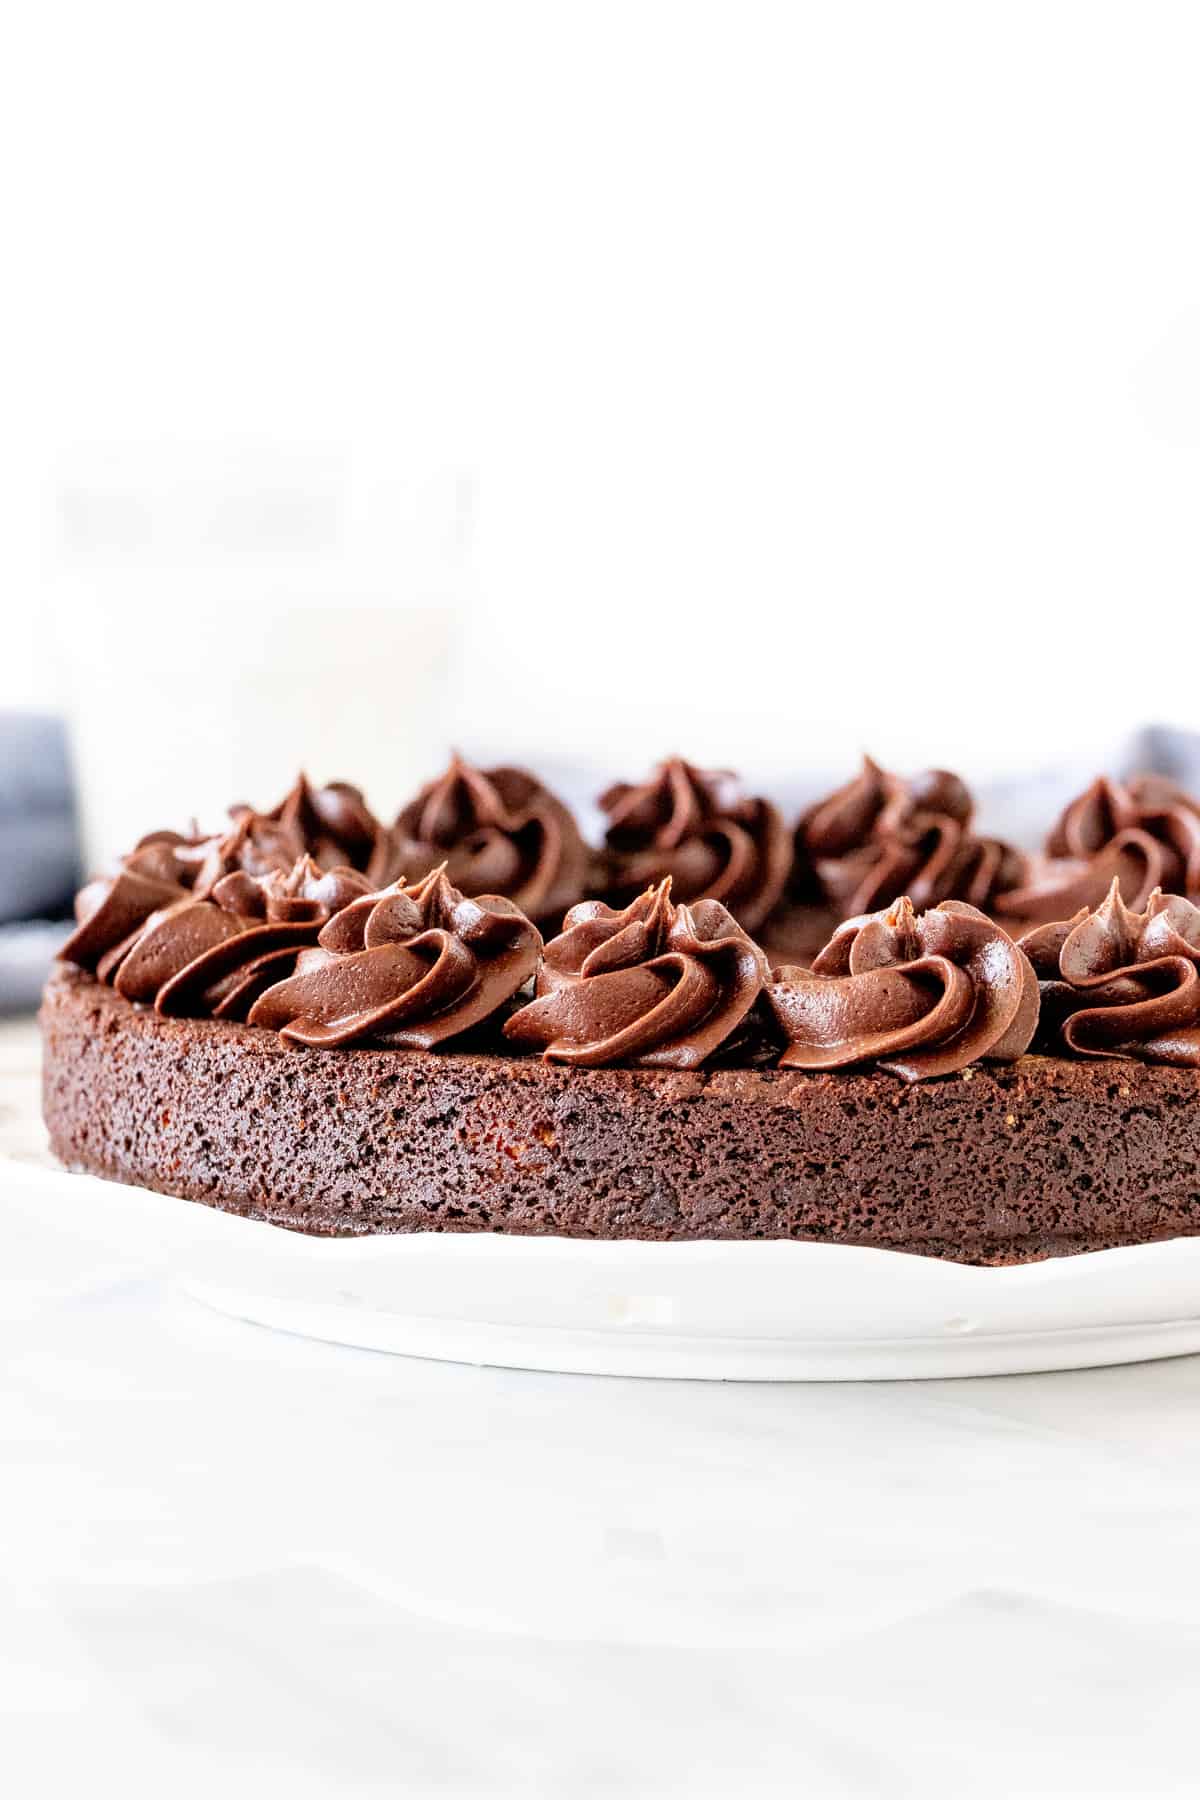 Chocolate cookie cake with chocolate frosting piped around the edges